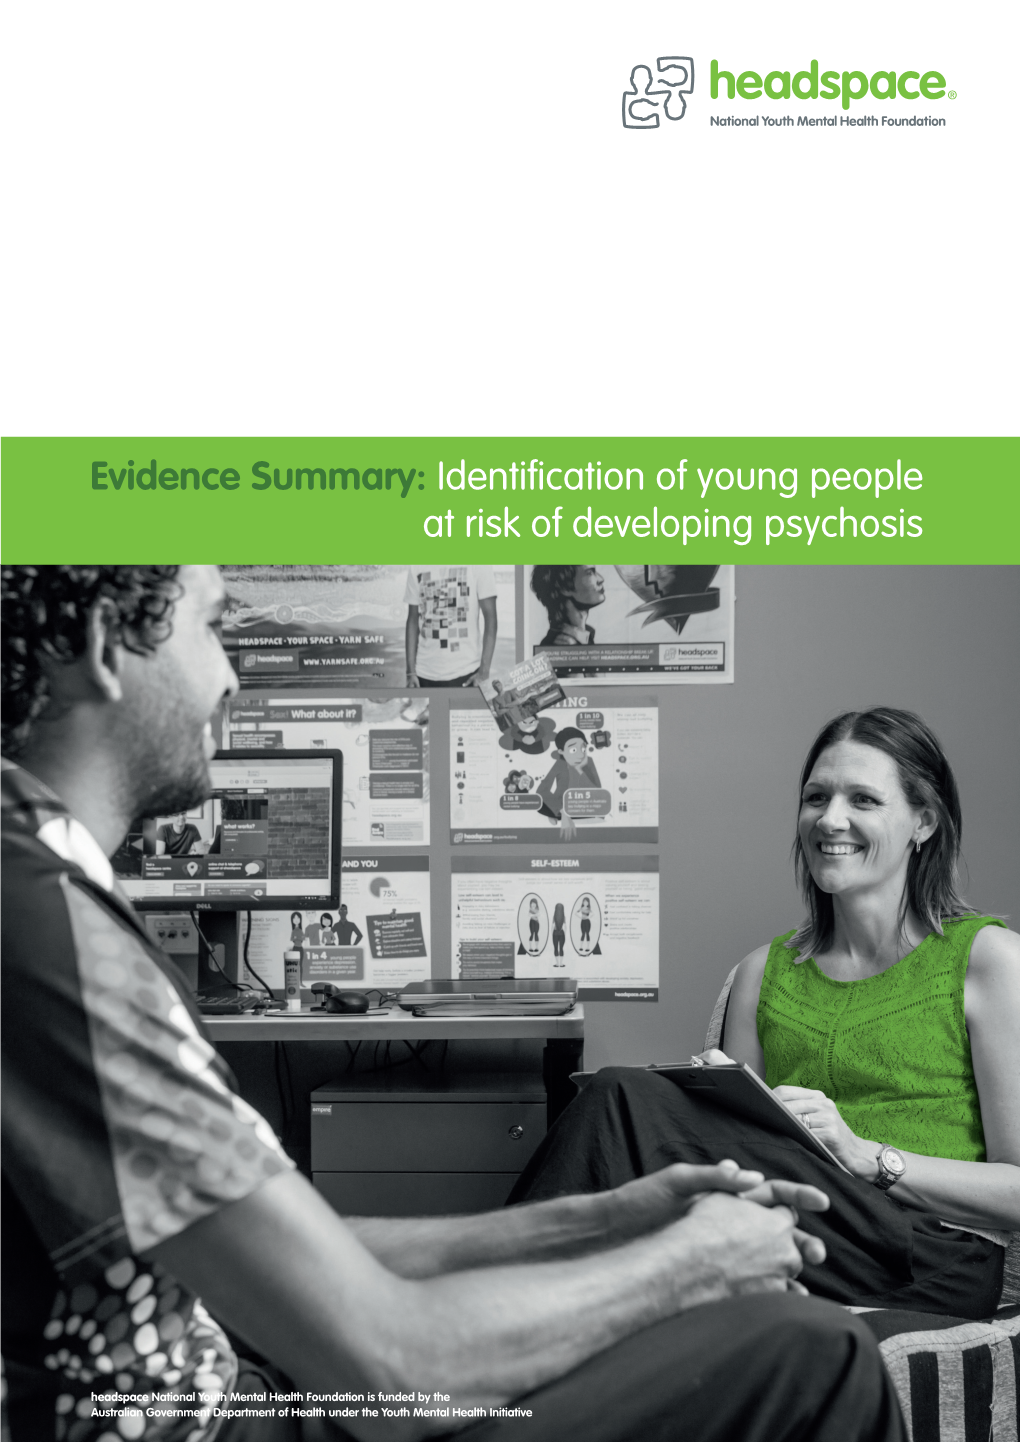 Identifying Young People at Risk of Developing Psychosis